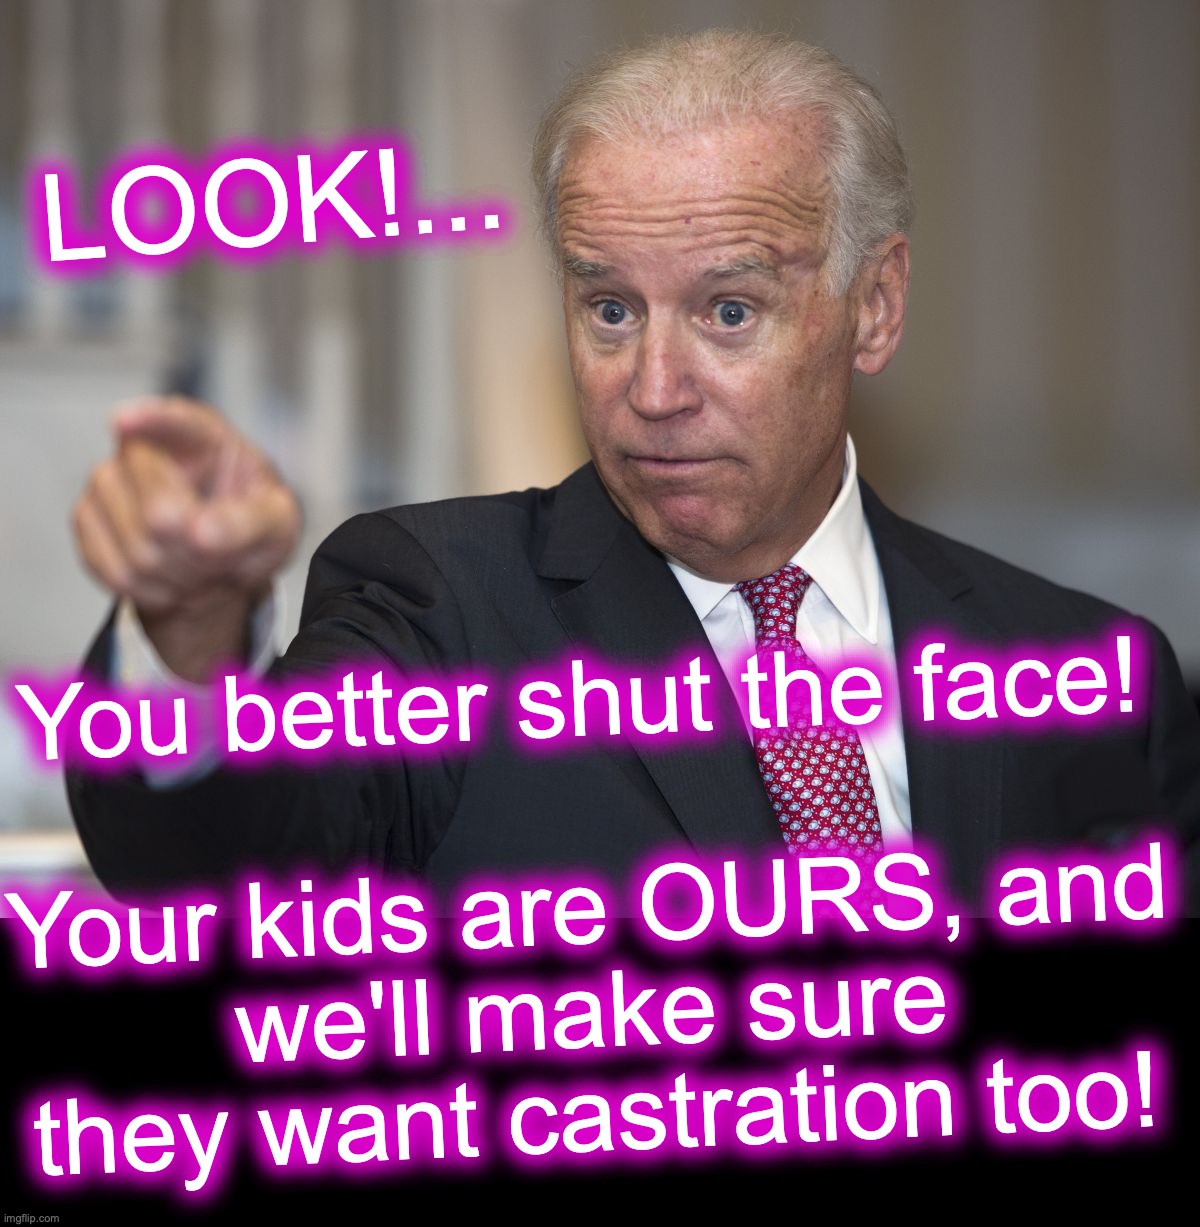 [warning: wannabedictator satire] | LOOK!... You better shut the face!
 
Your kids are OURS, and we'll make sure they want castration too! | image tagged in biden pointing,wannabe,dictator,memes | made w/ Imgflip meme maker